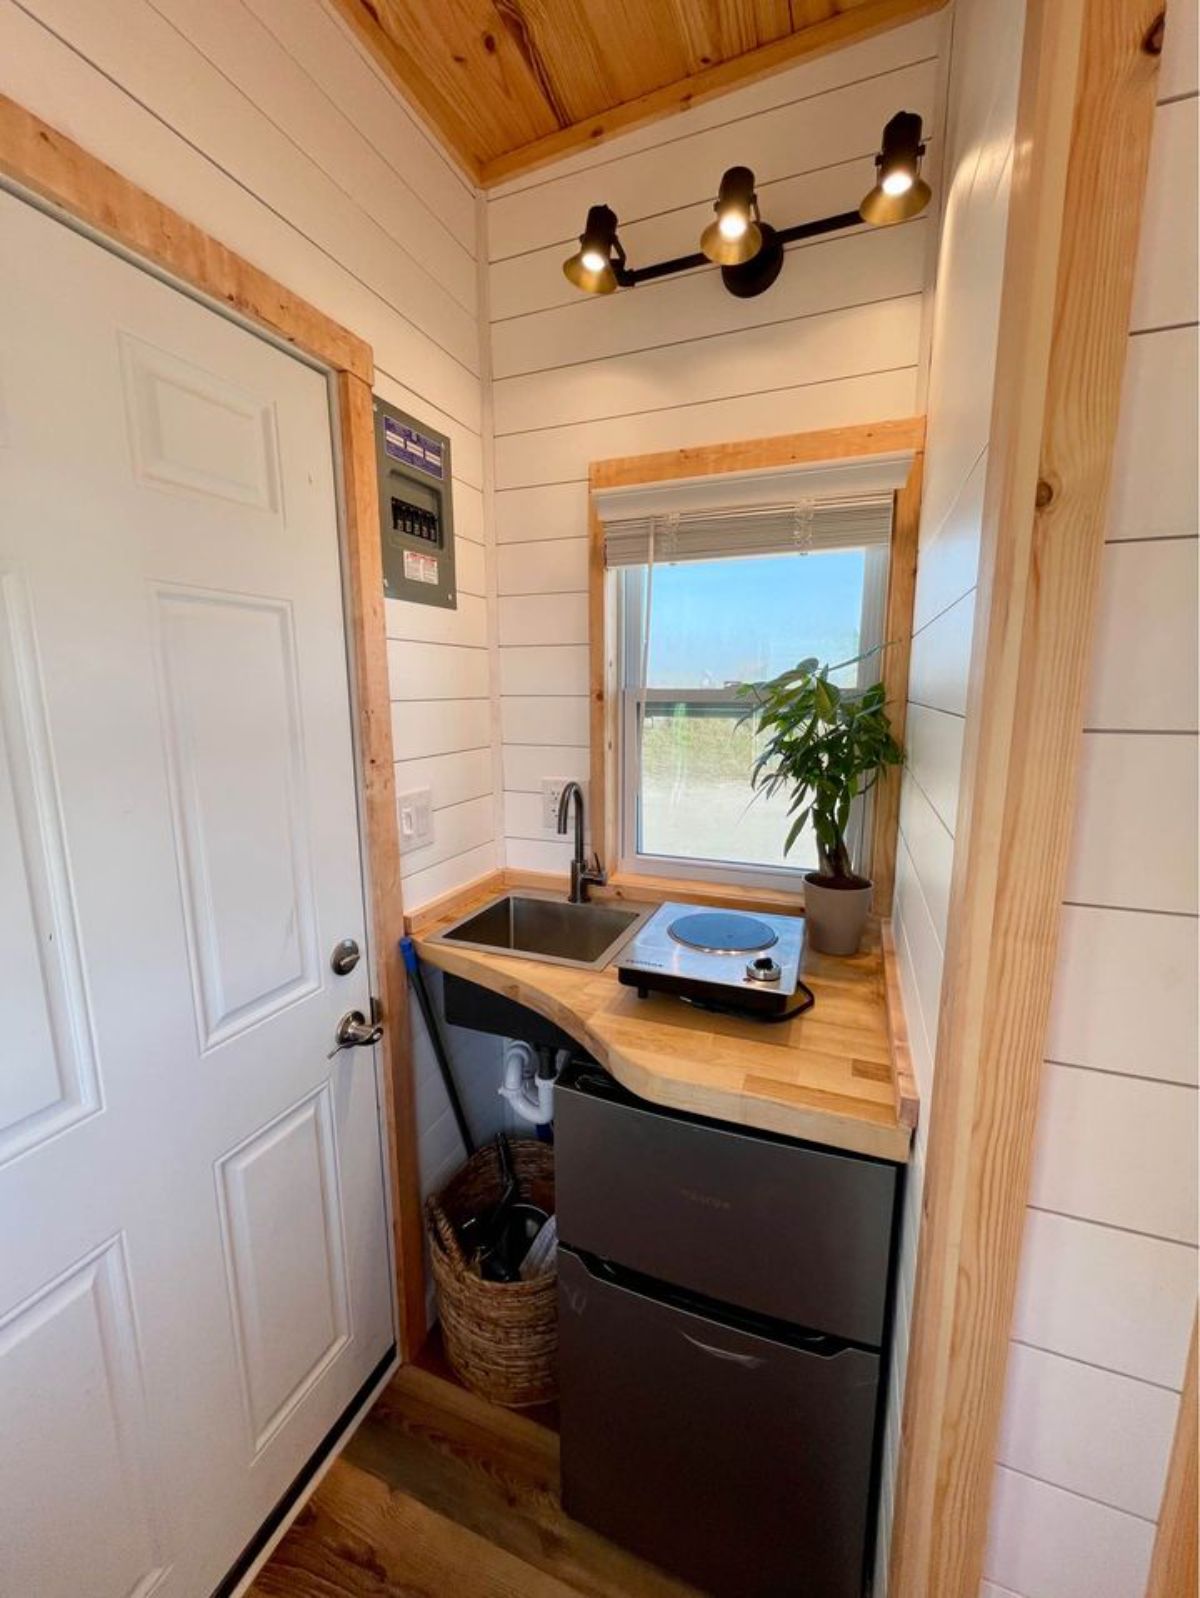 Kitchen area of 14' Tiny Camper on Wheels